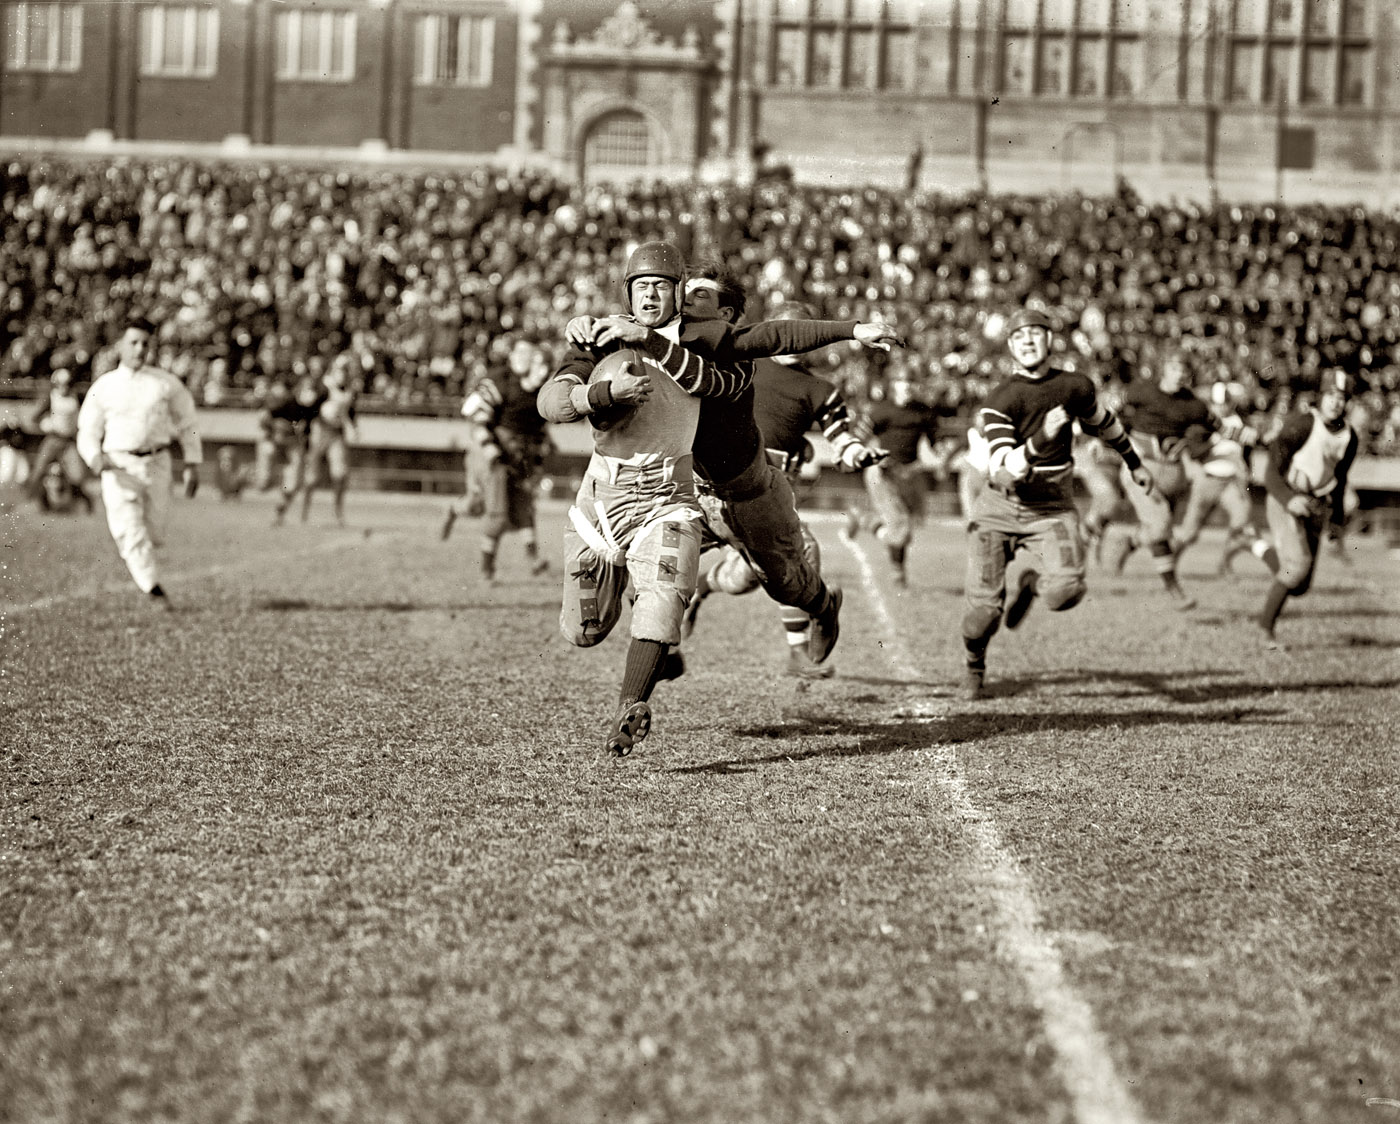 November 3, 1923. High school football in Washington, D.C.: Eastern vs. Central. View full size. National Photo Company Collection glass negative.